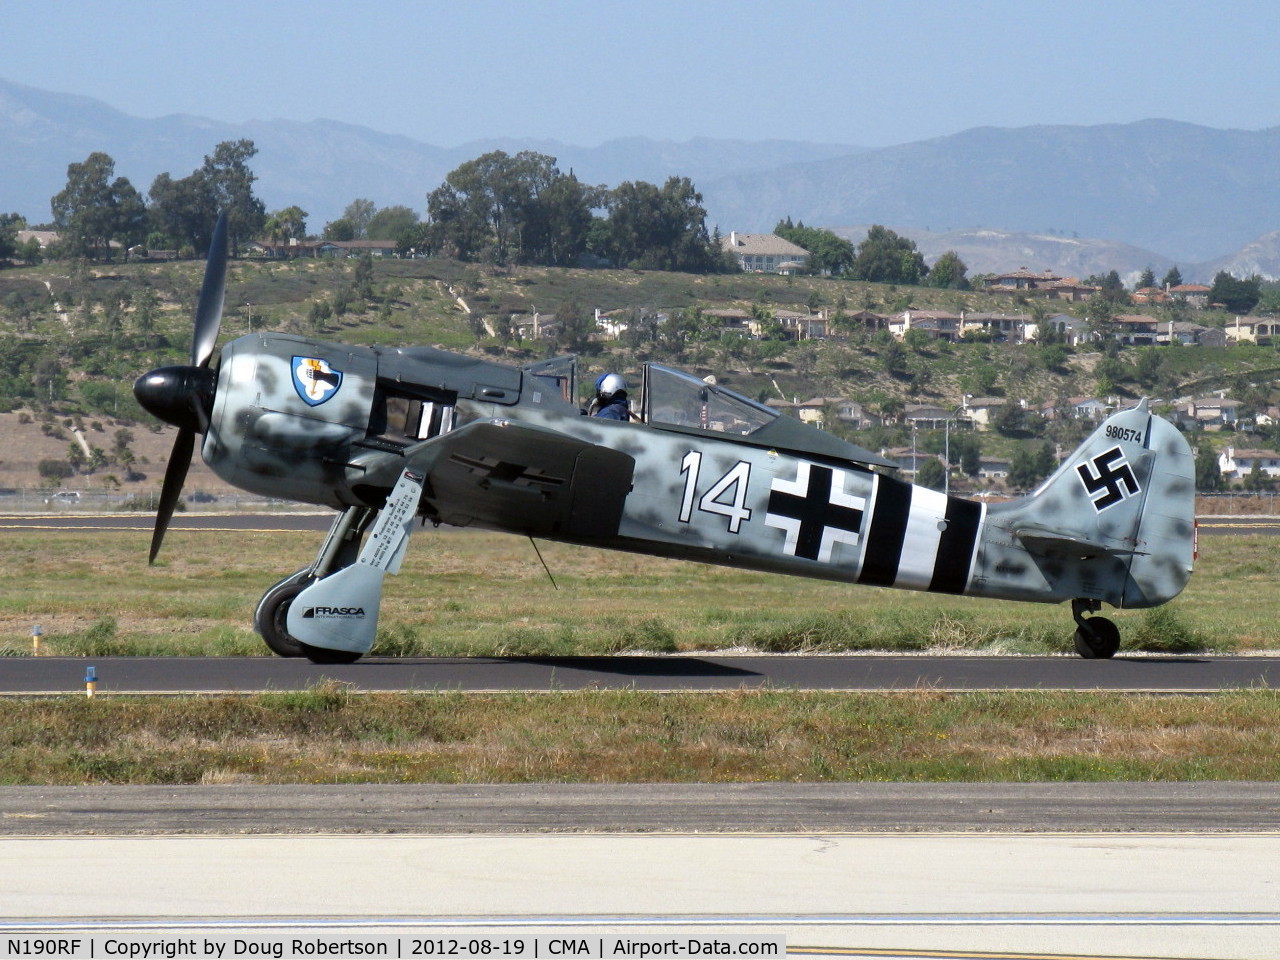 N190RF, Focke-Wulf Fw-190A-9 C/N 980 574, 1944 Focke Wulf Fw 190A-9, BMW 801 series radial 1,973 Hp, taxi to 26. Wings Over Camarillo Airshow 2012- Rudy Frasca's rare visitor. See in-flight photos.